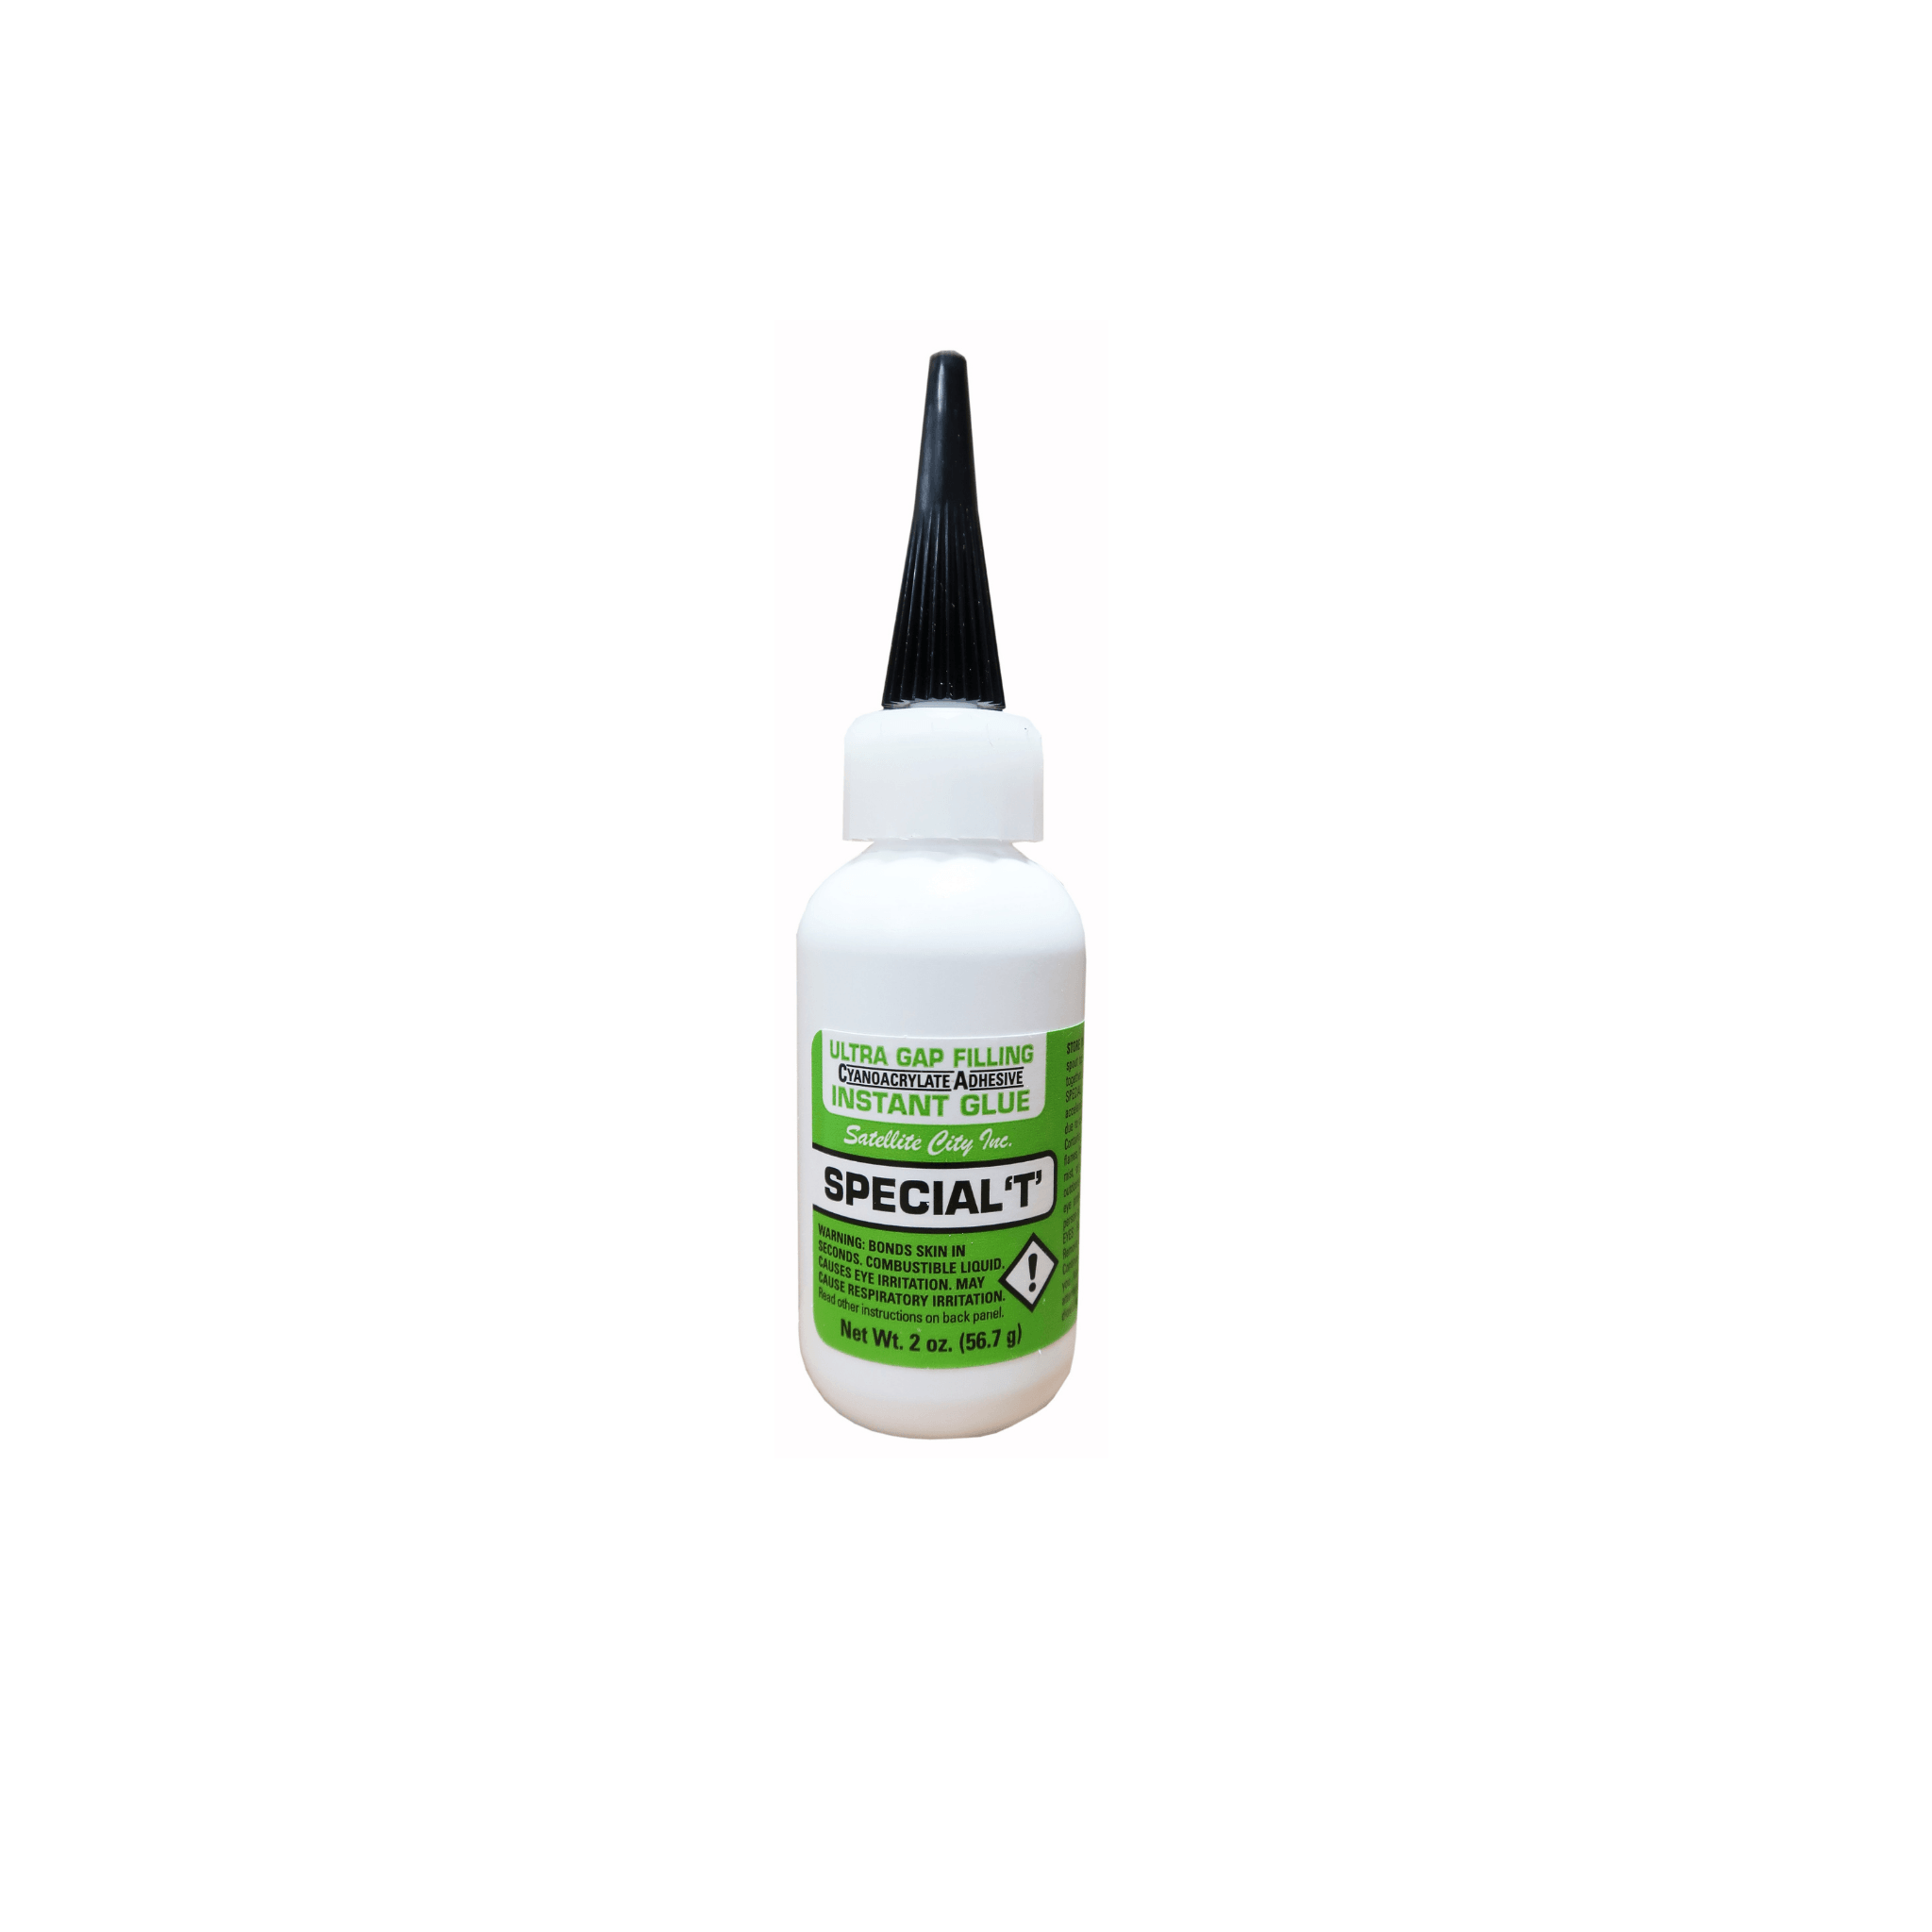 Satellite City HST-4T Special T 2oz Thick CA glue - Direct Stone Tool Supply, Inc